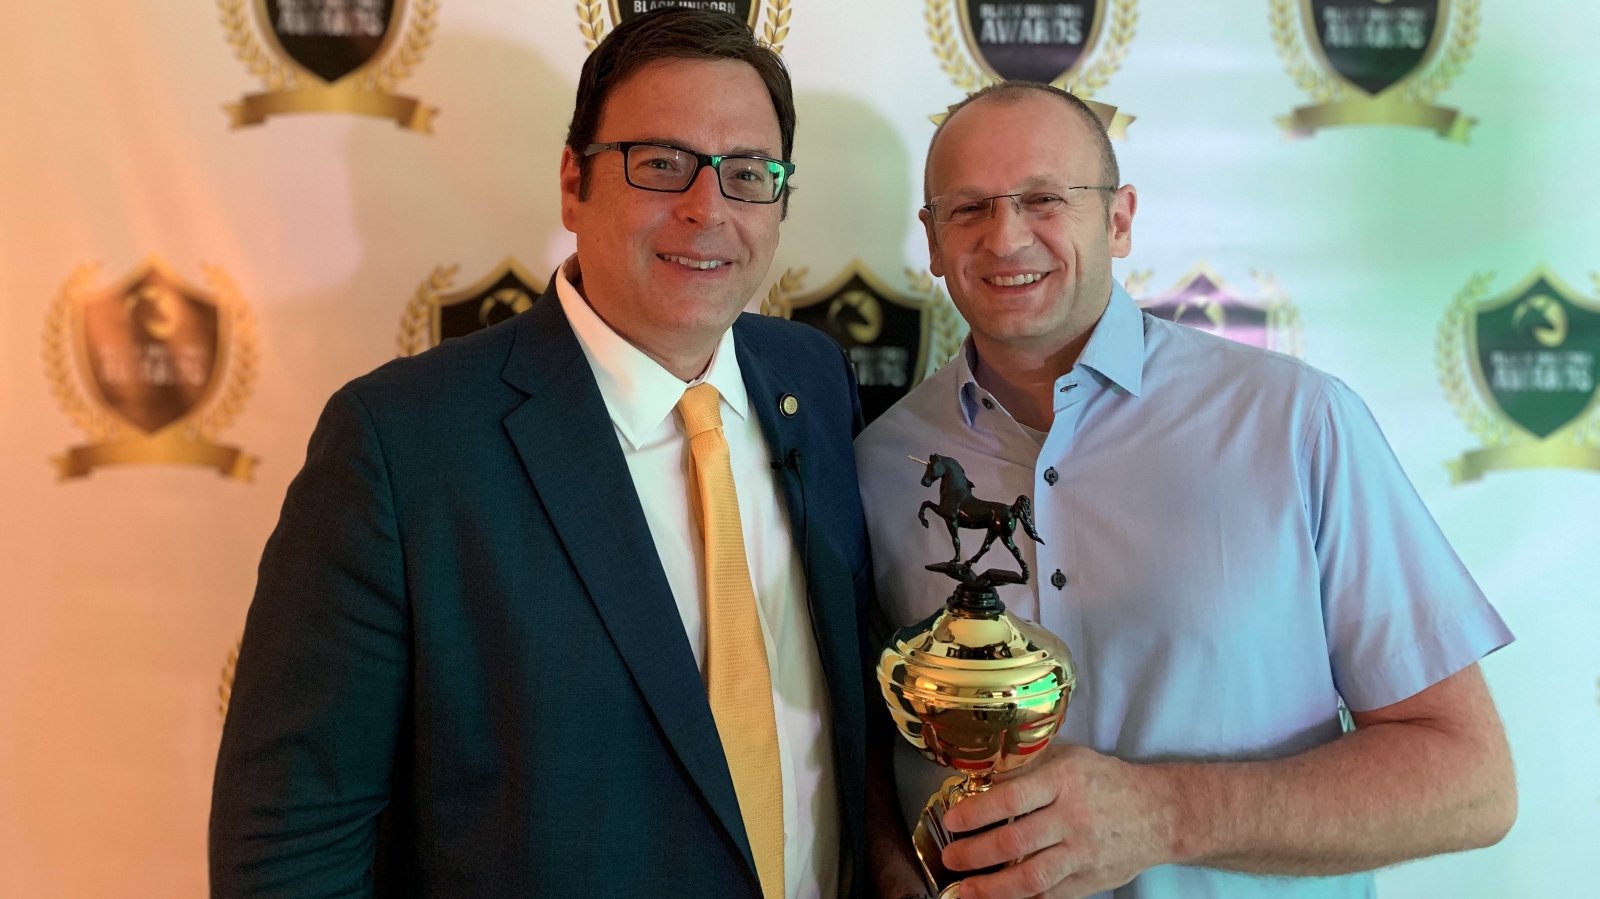 Checkmarx CEO Emmanuel Benzaquen, right, accepting the 2019 Black Unicorn Award from judge Gary Miliefsky. Photo: courtesy